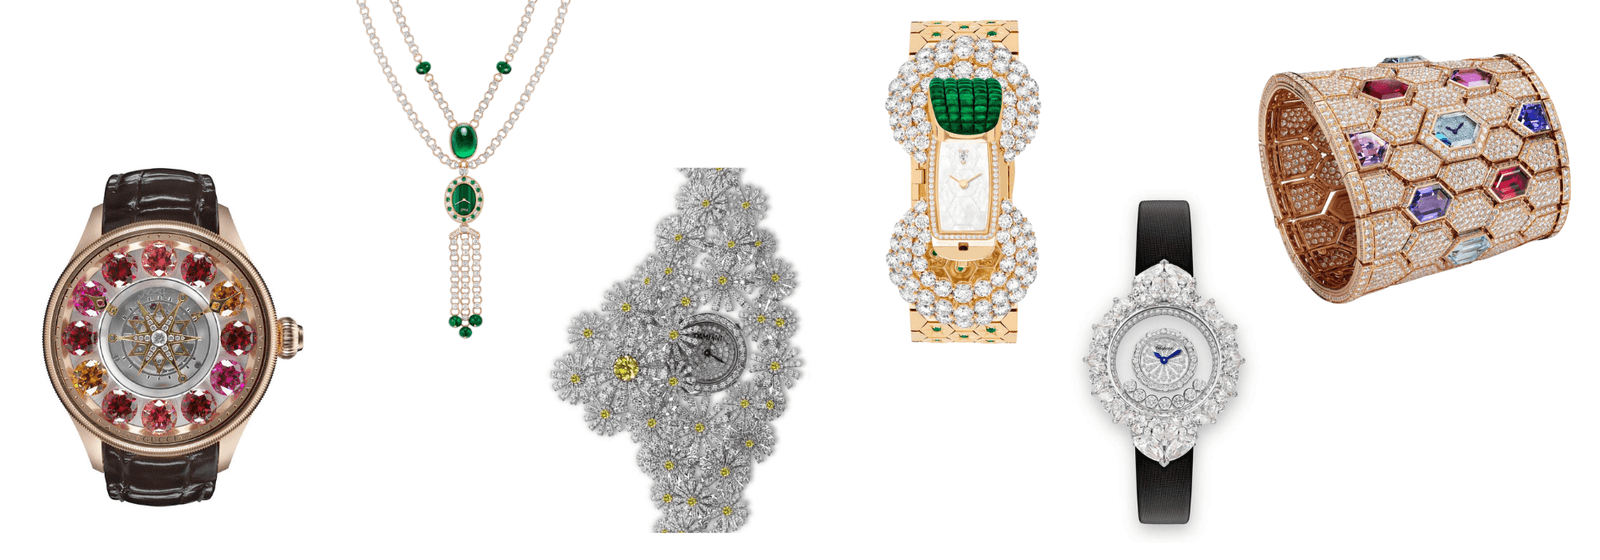 GPHG 2023: Nominations For The Jewellery Watch Of The Year